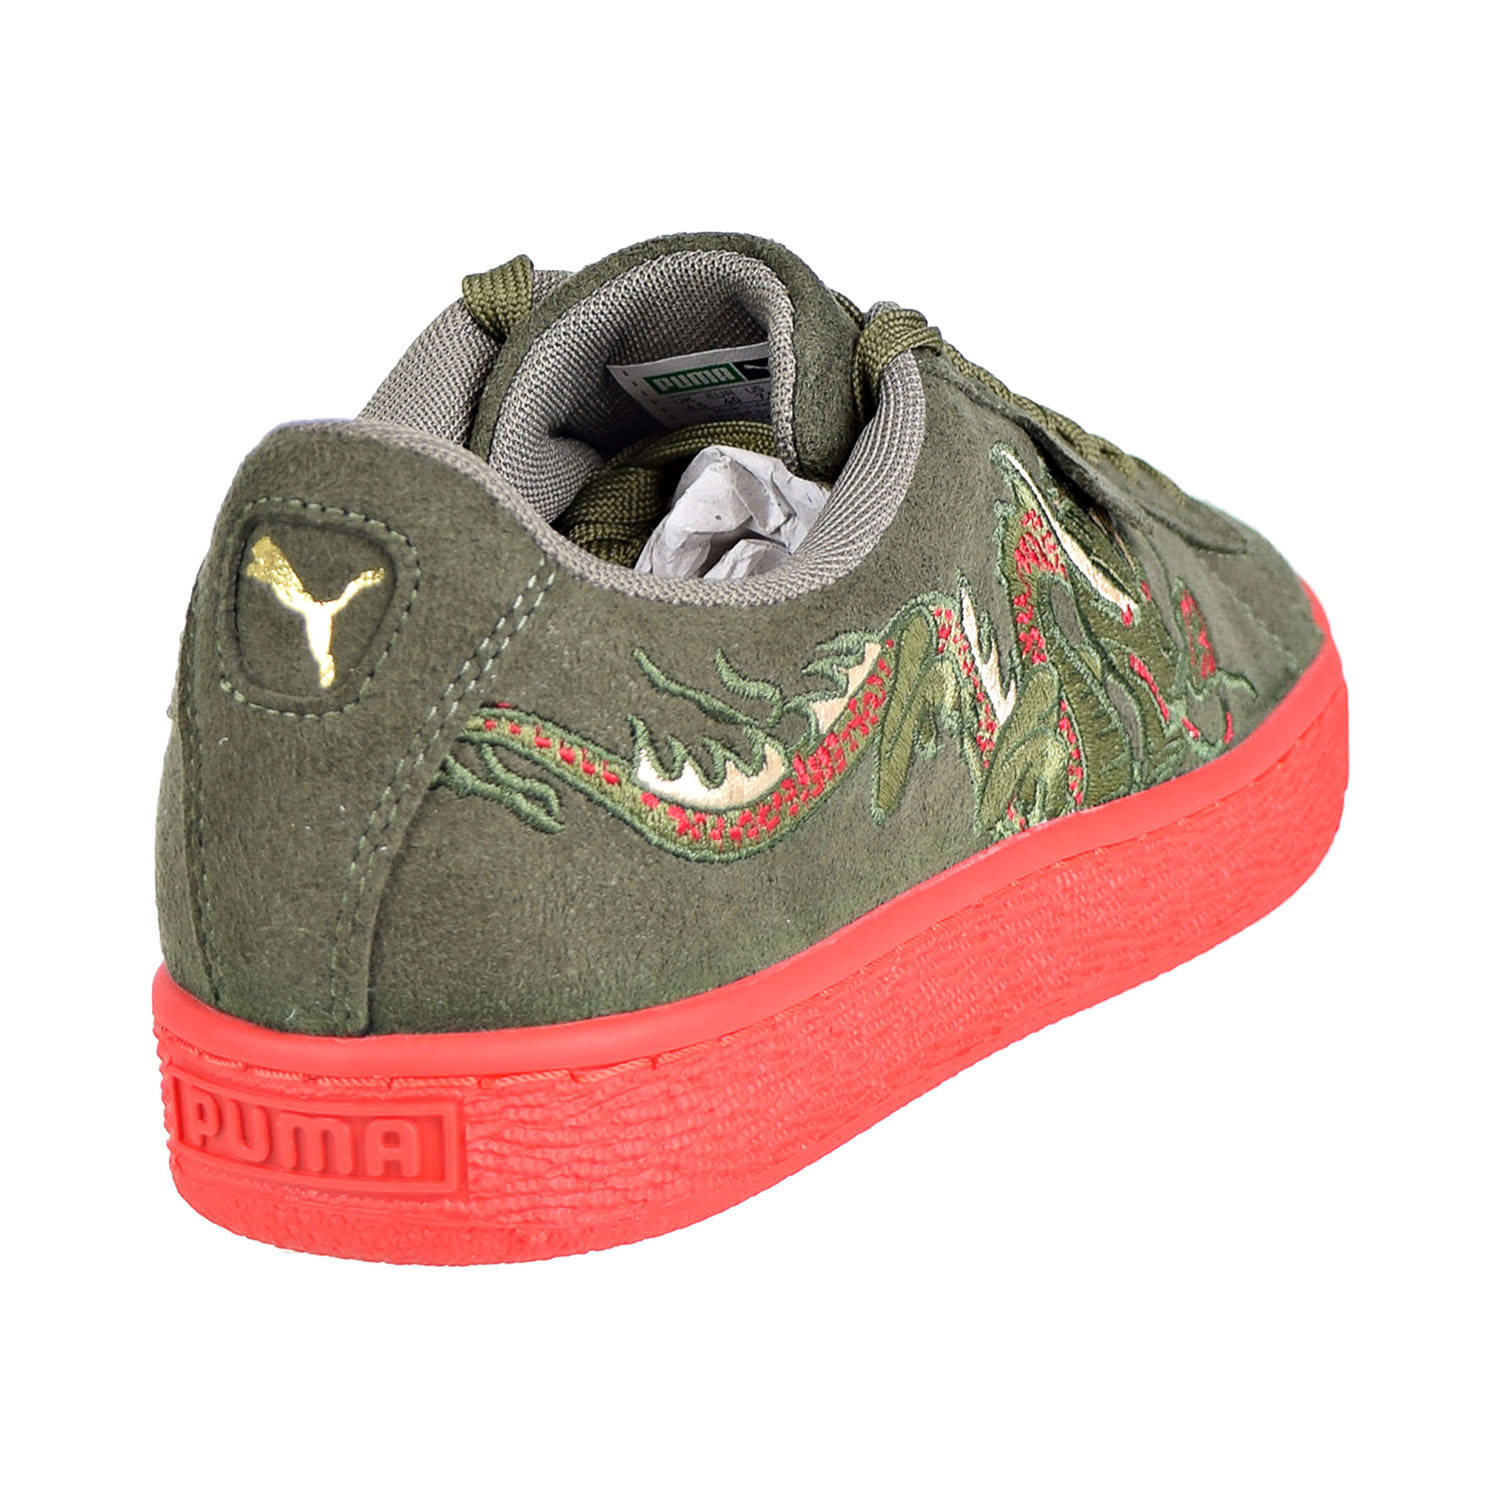 Puma Court Classic Dragon Patch Men's Shoes Burnt Olive/High Risk Red 368359-01 - image 3 of 6